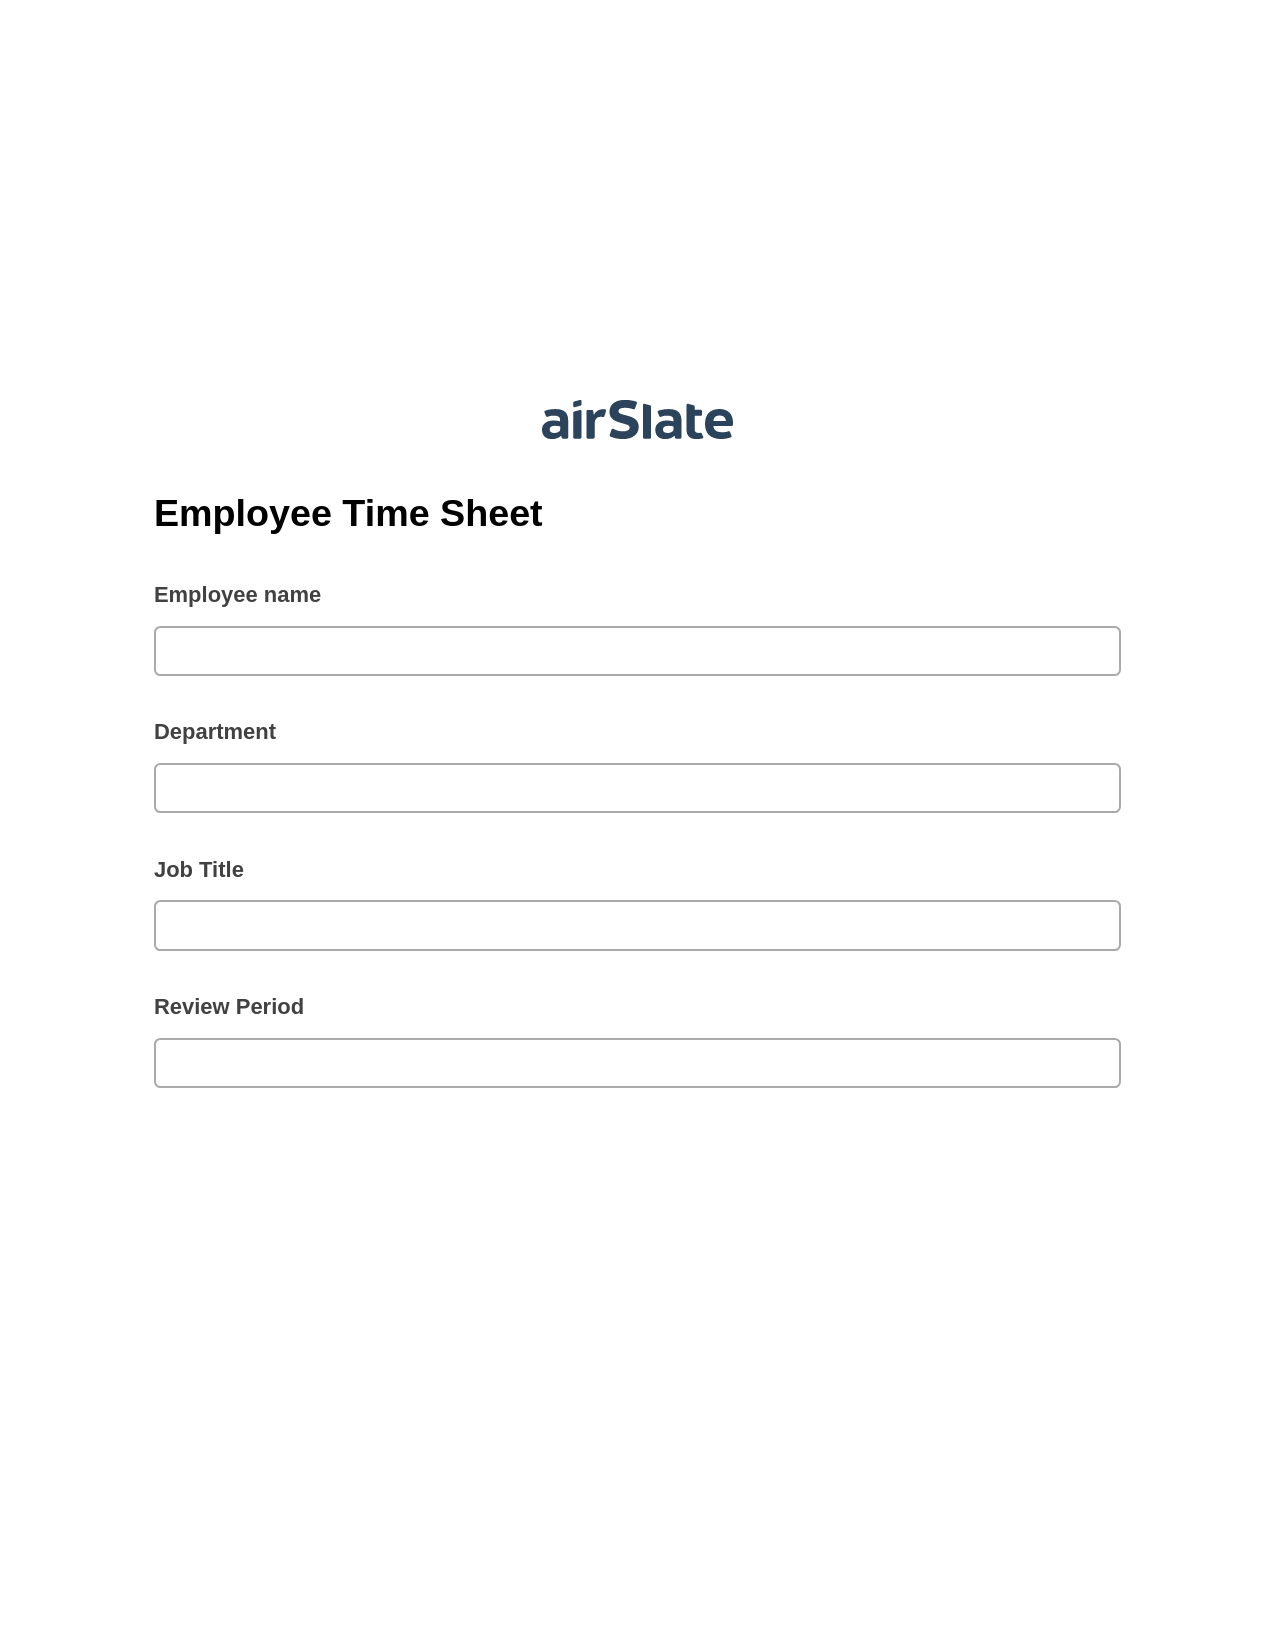 Employee Time Sheet Pre-fill from Google Sheets Bot, Create Salesforce Records Bot, Export to Excel 365 Bot